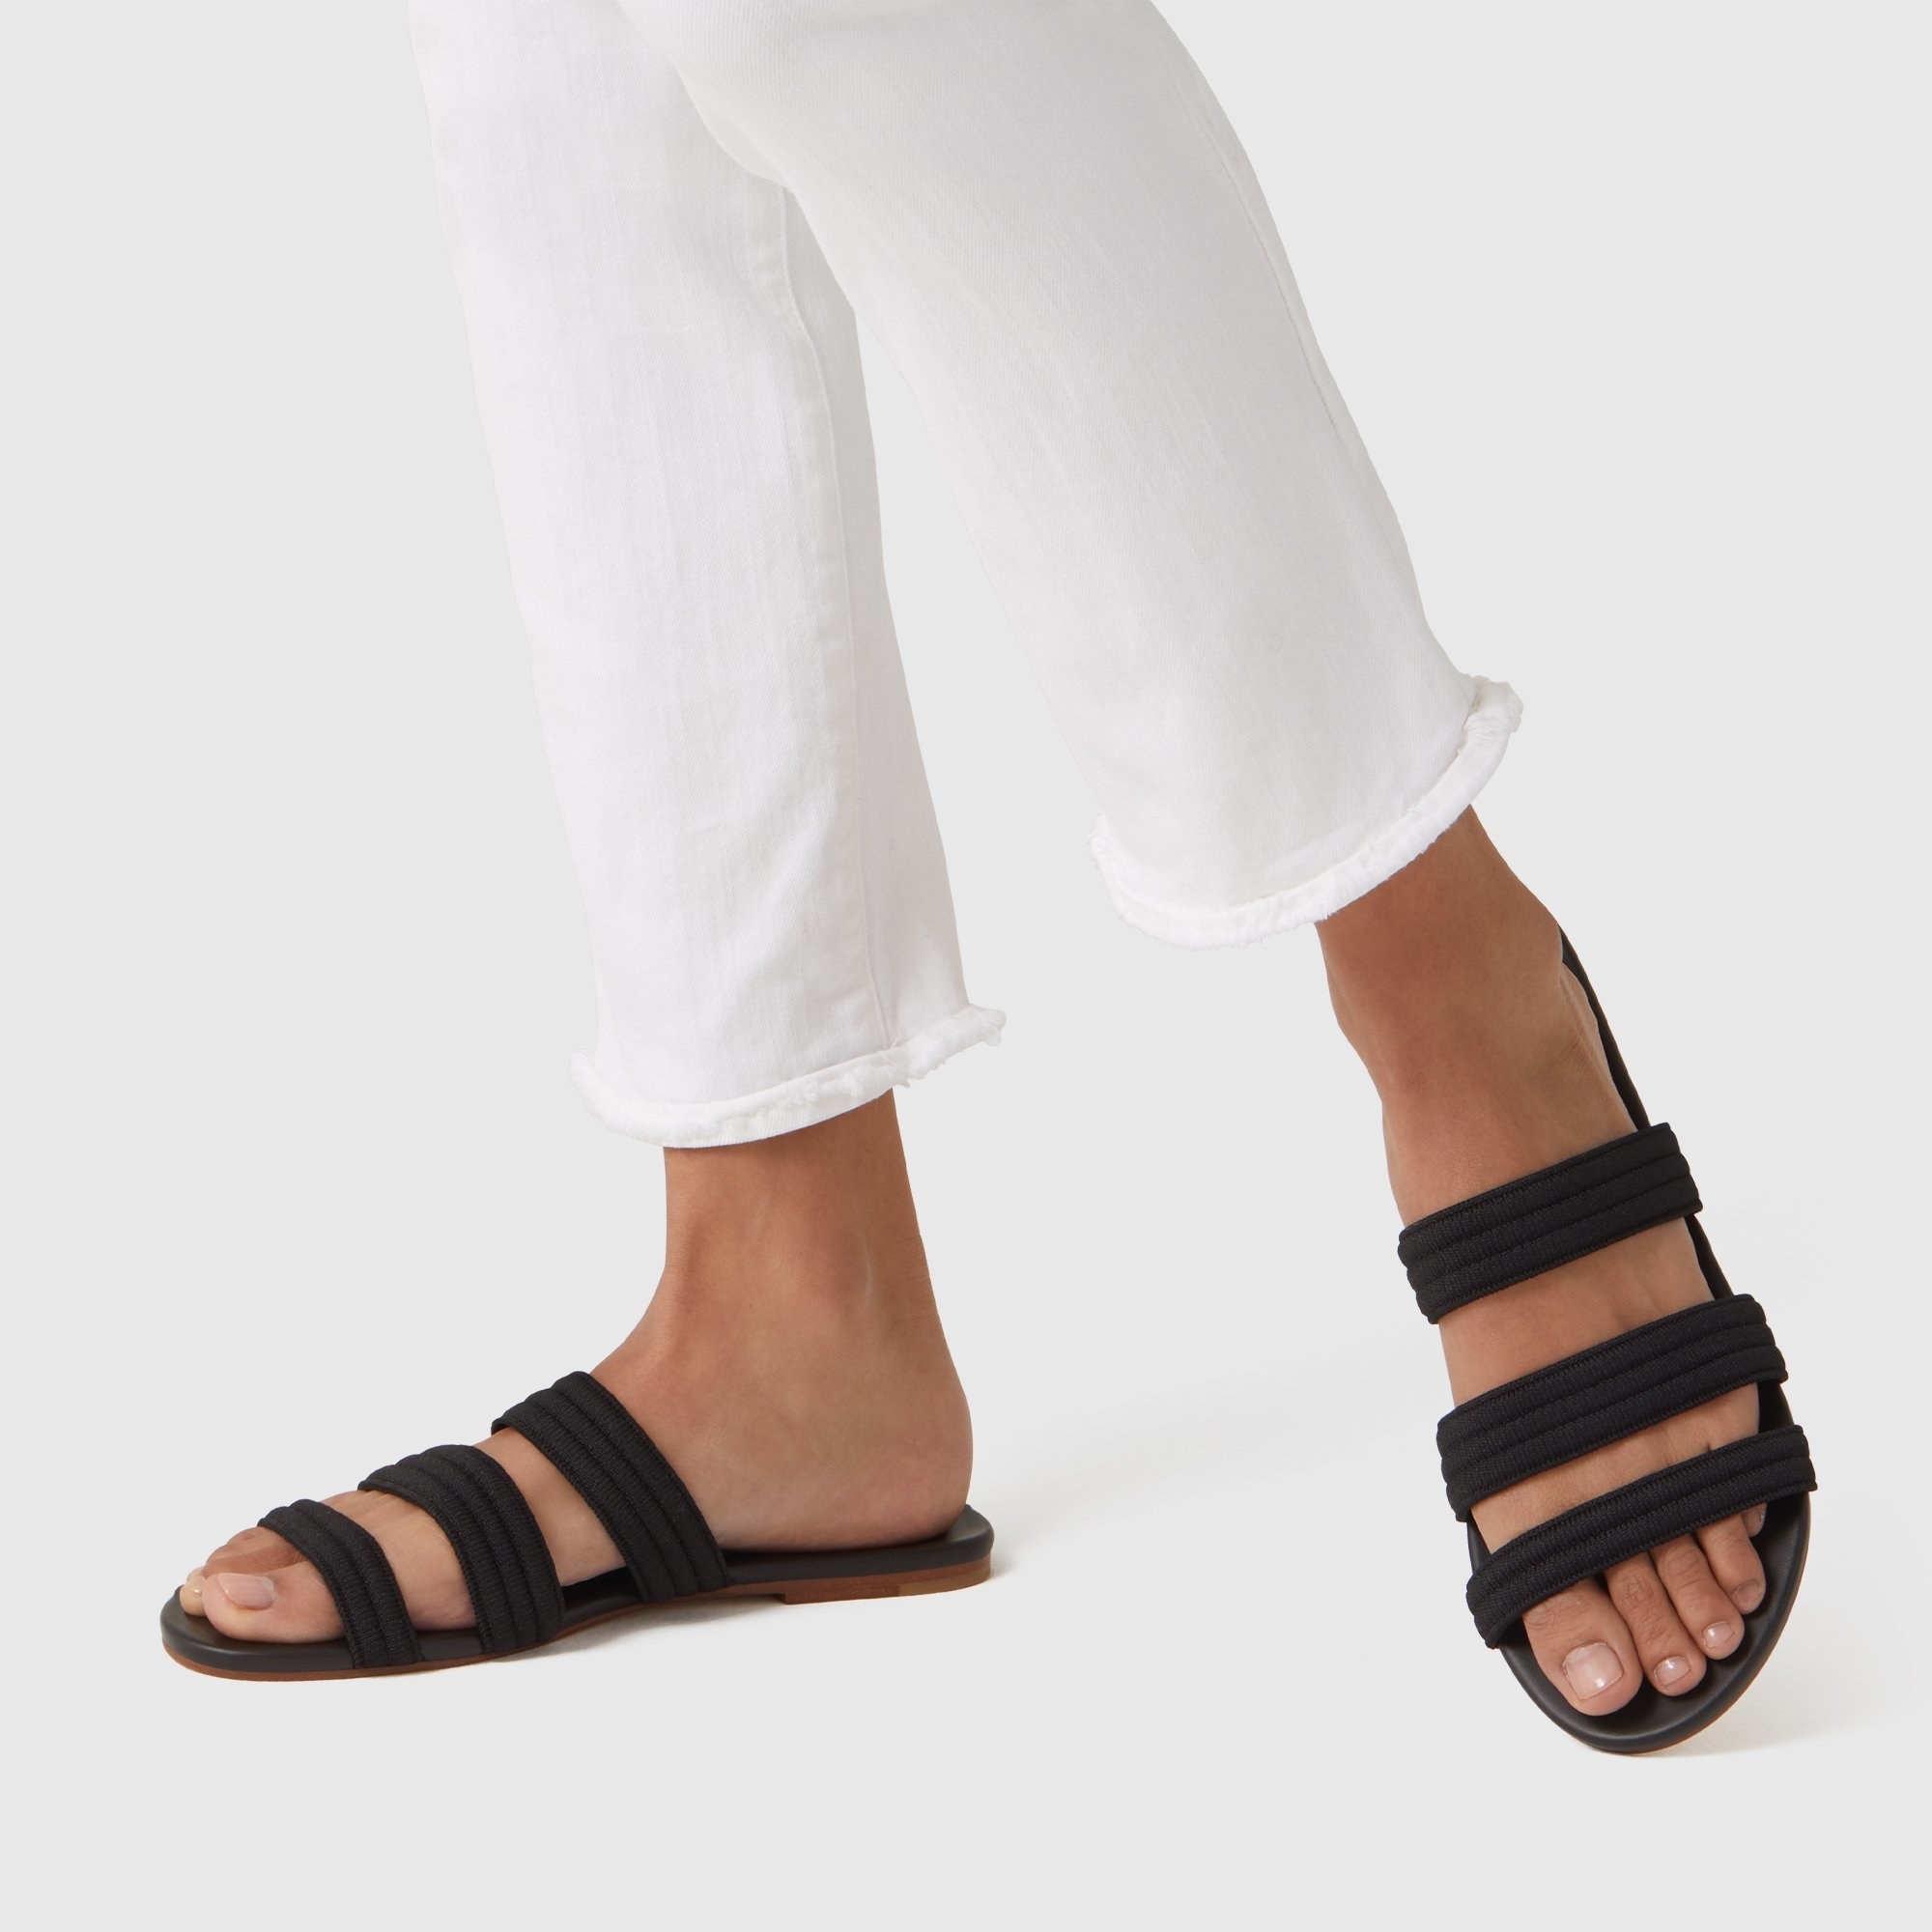 Model wearing the sandals in black with three knit straps across the food